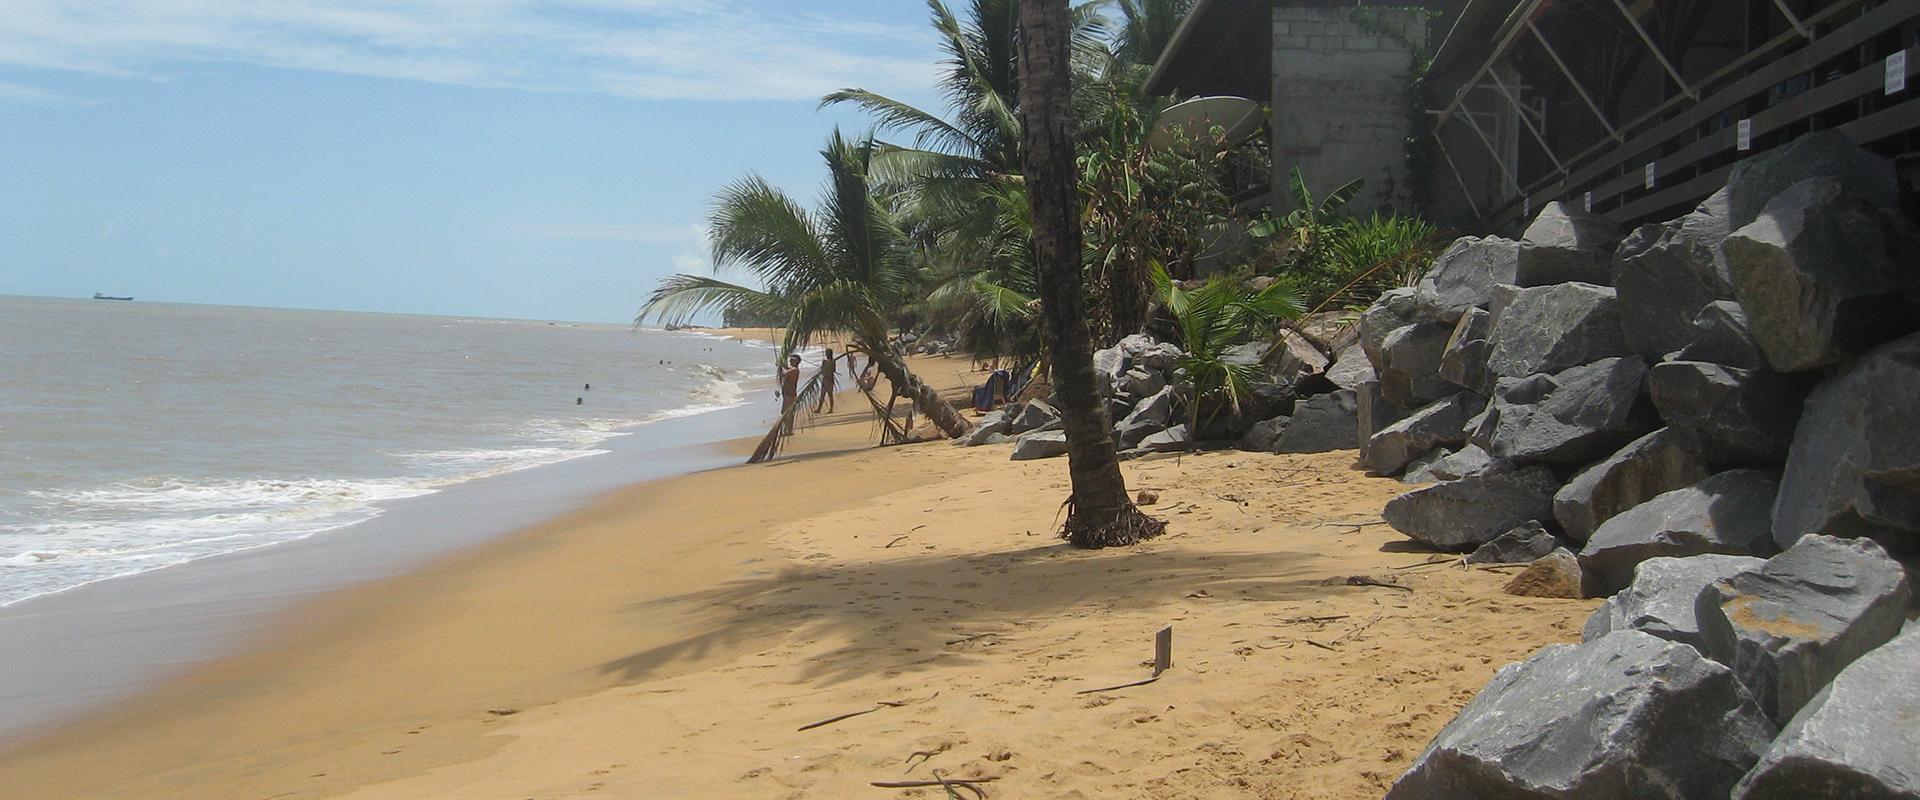 View of coastal erosion along the beaches at Rémire-Montjoly, French Guiana